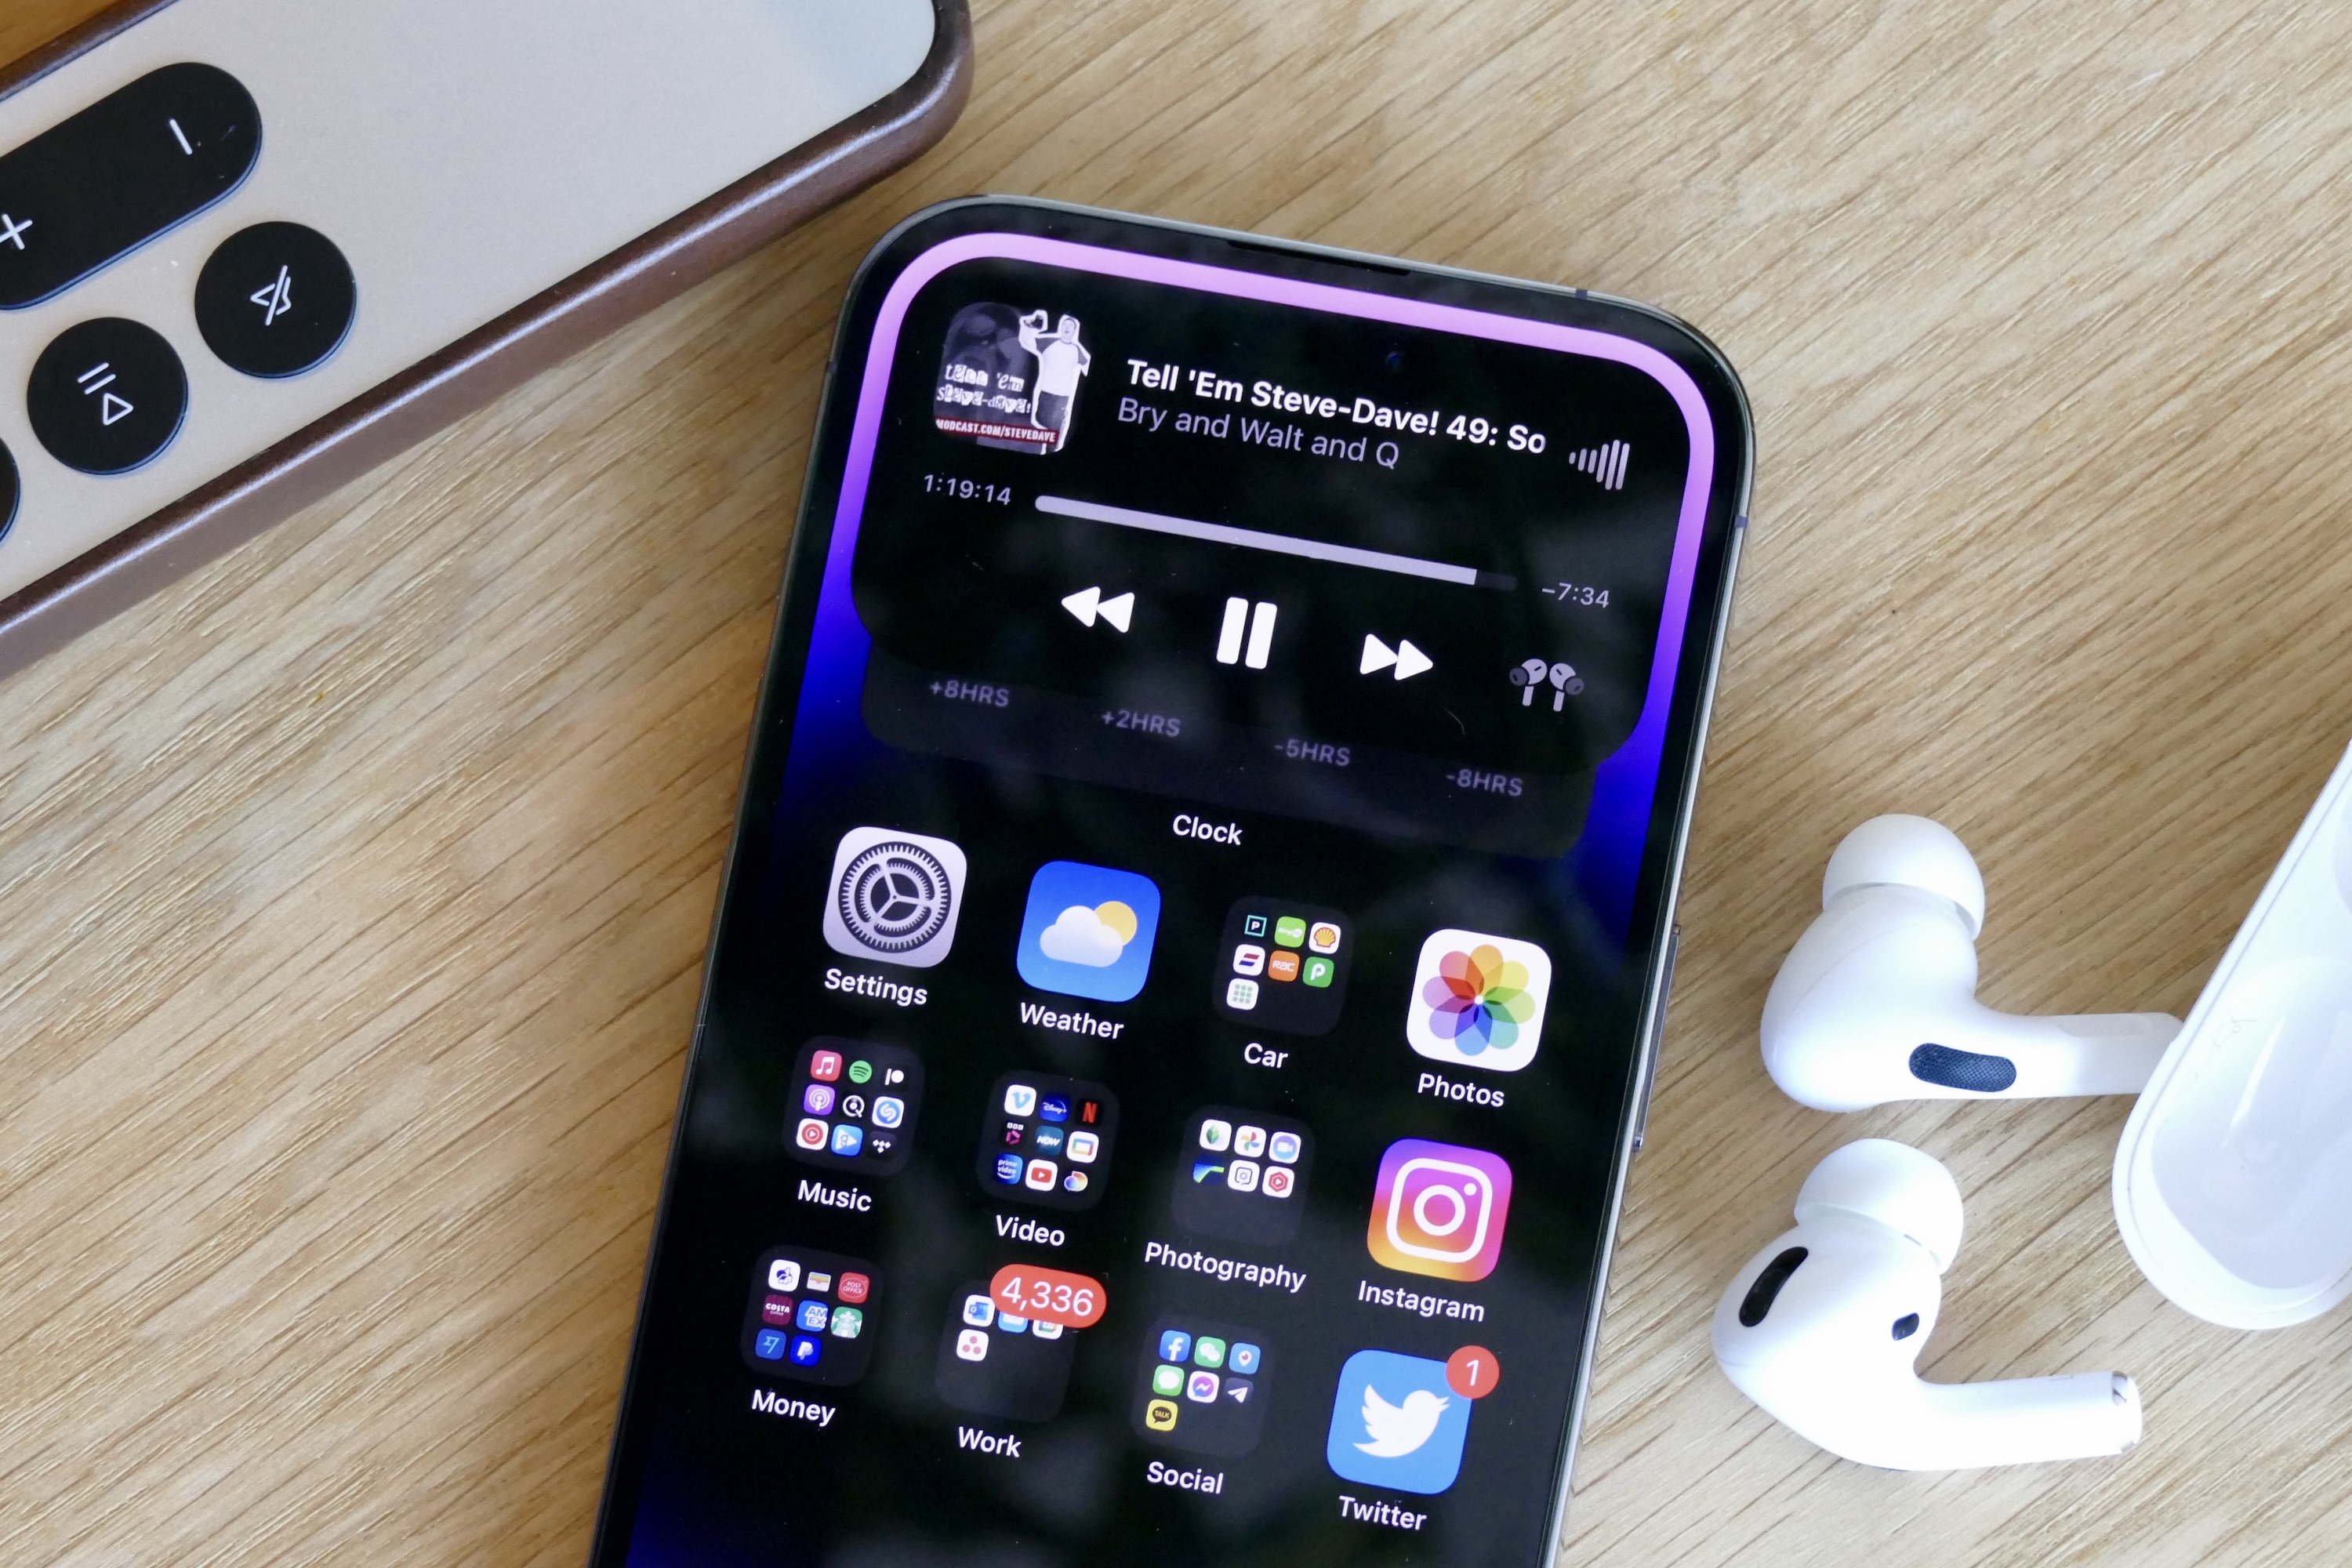 The iPhone 14 Pro's dynamic island displays music playing.